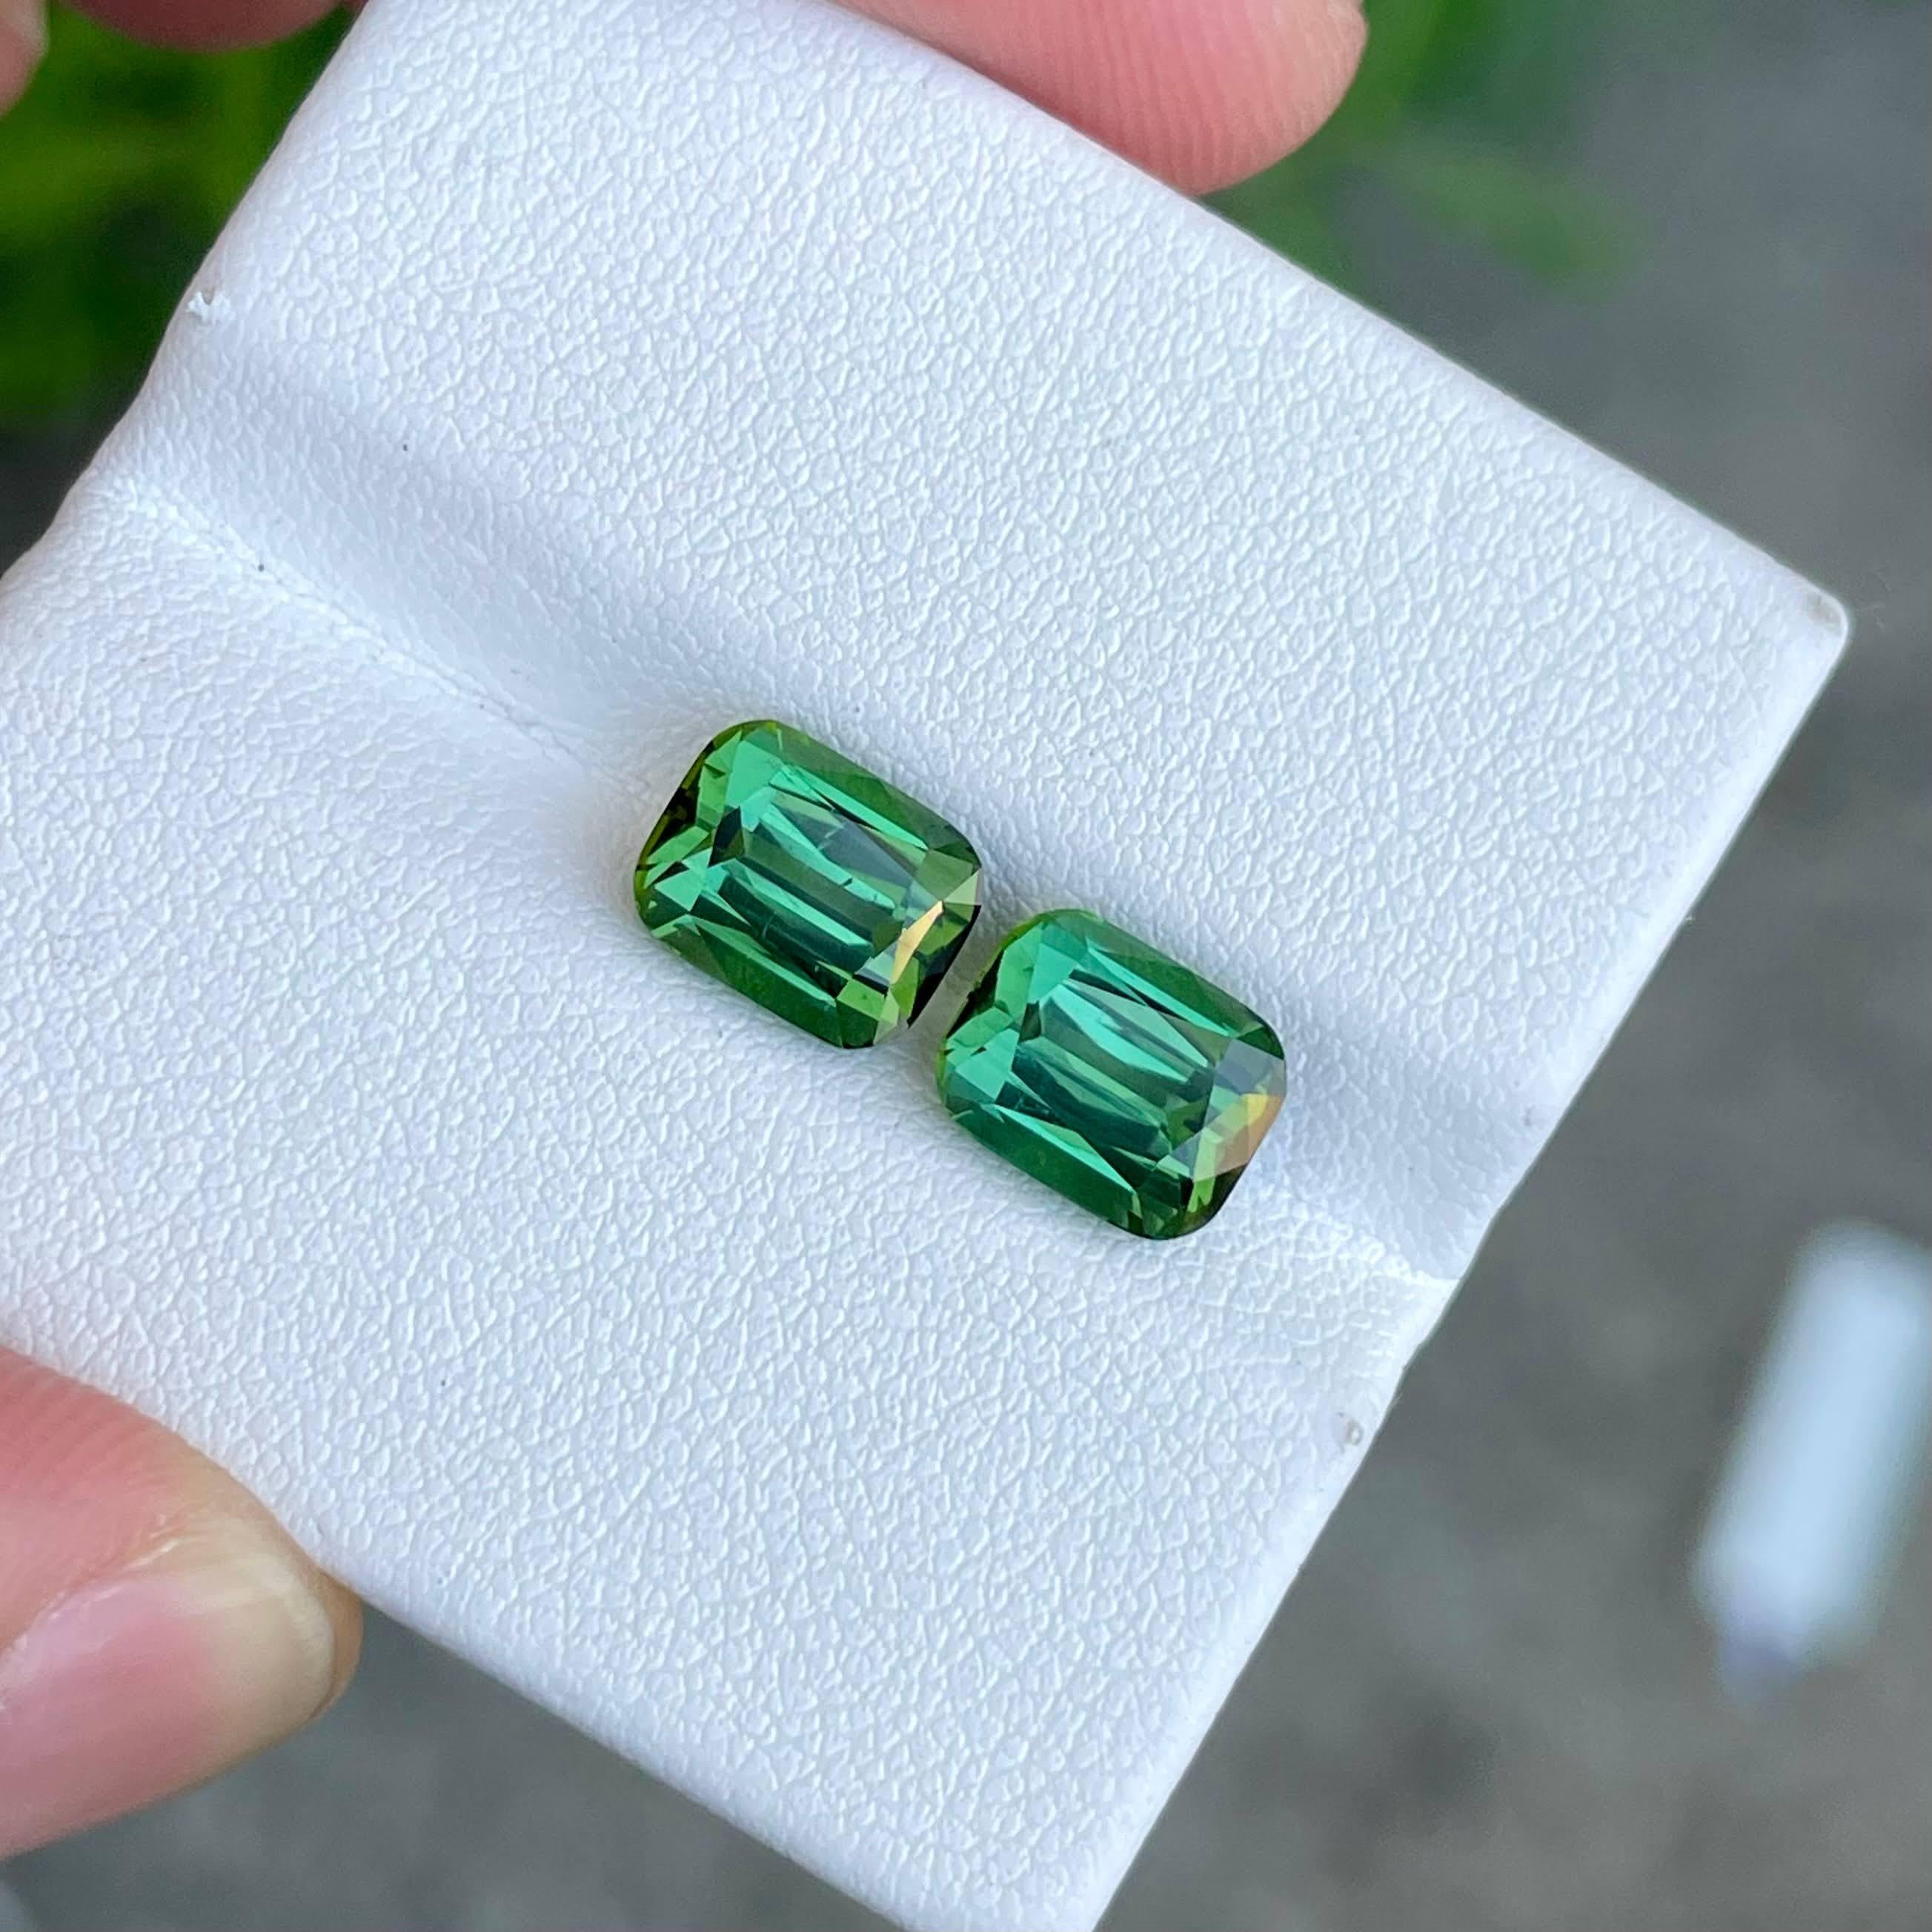 Weight 5.24 carats
Dimensions 8.3x6.6x5.6 mm
Treatment none 
Origin Afghanistan 
Clarity SI
Shape cushion 
Cut fancy cushion




This exquisite pair of Bluish Green tourmaline gemstones boasts a combined weight of 5.24 carats, each expertly crafted